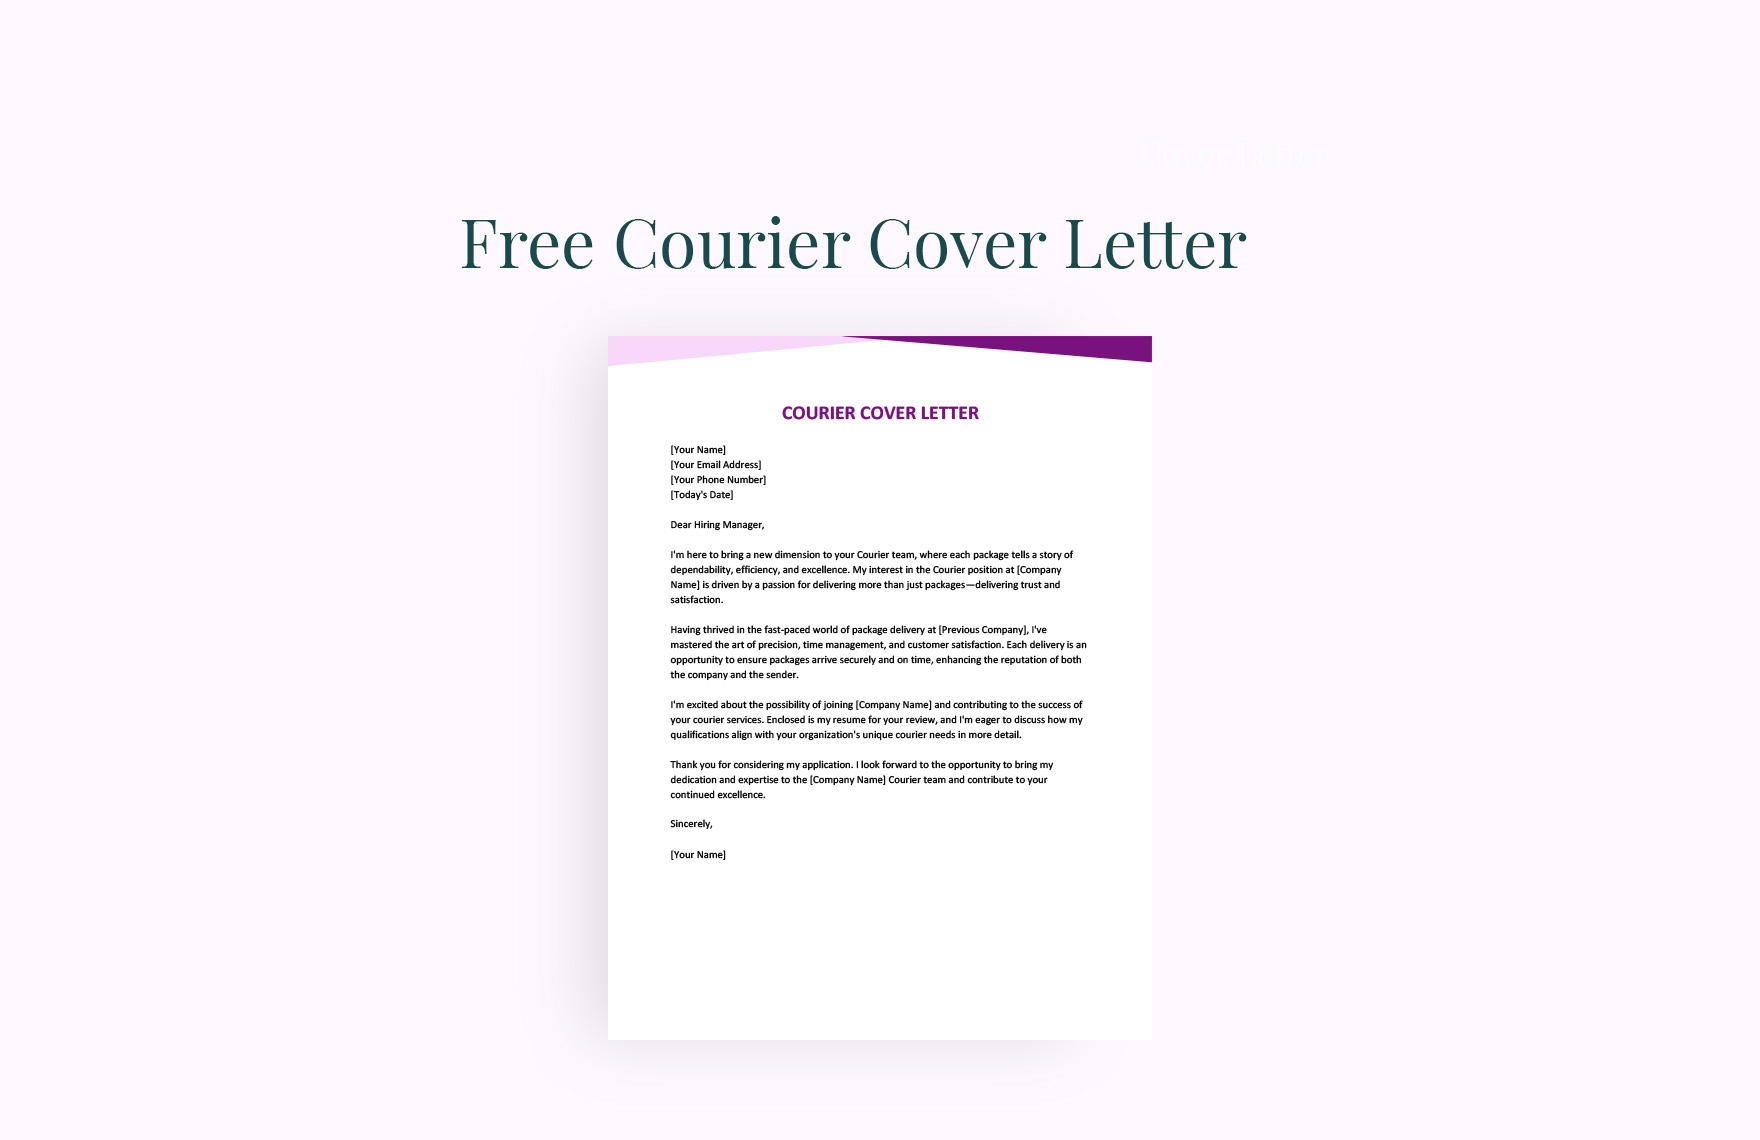 Courier Cover Letter in Word, Google Docs